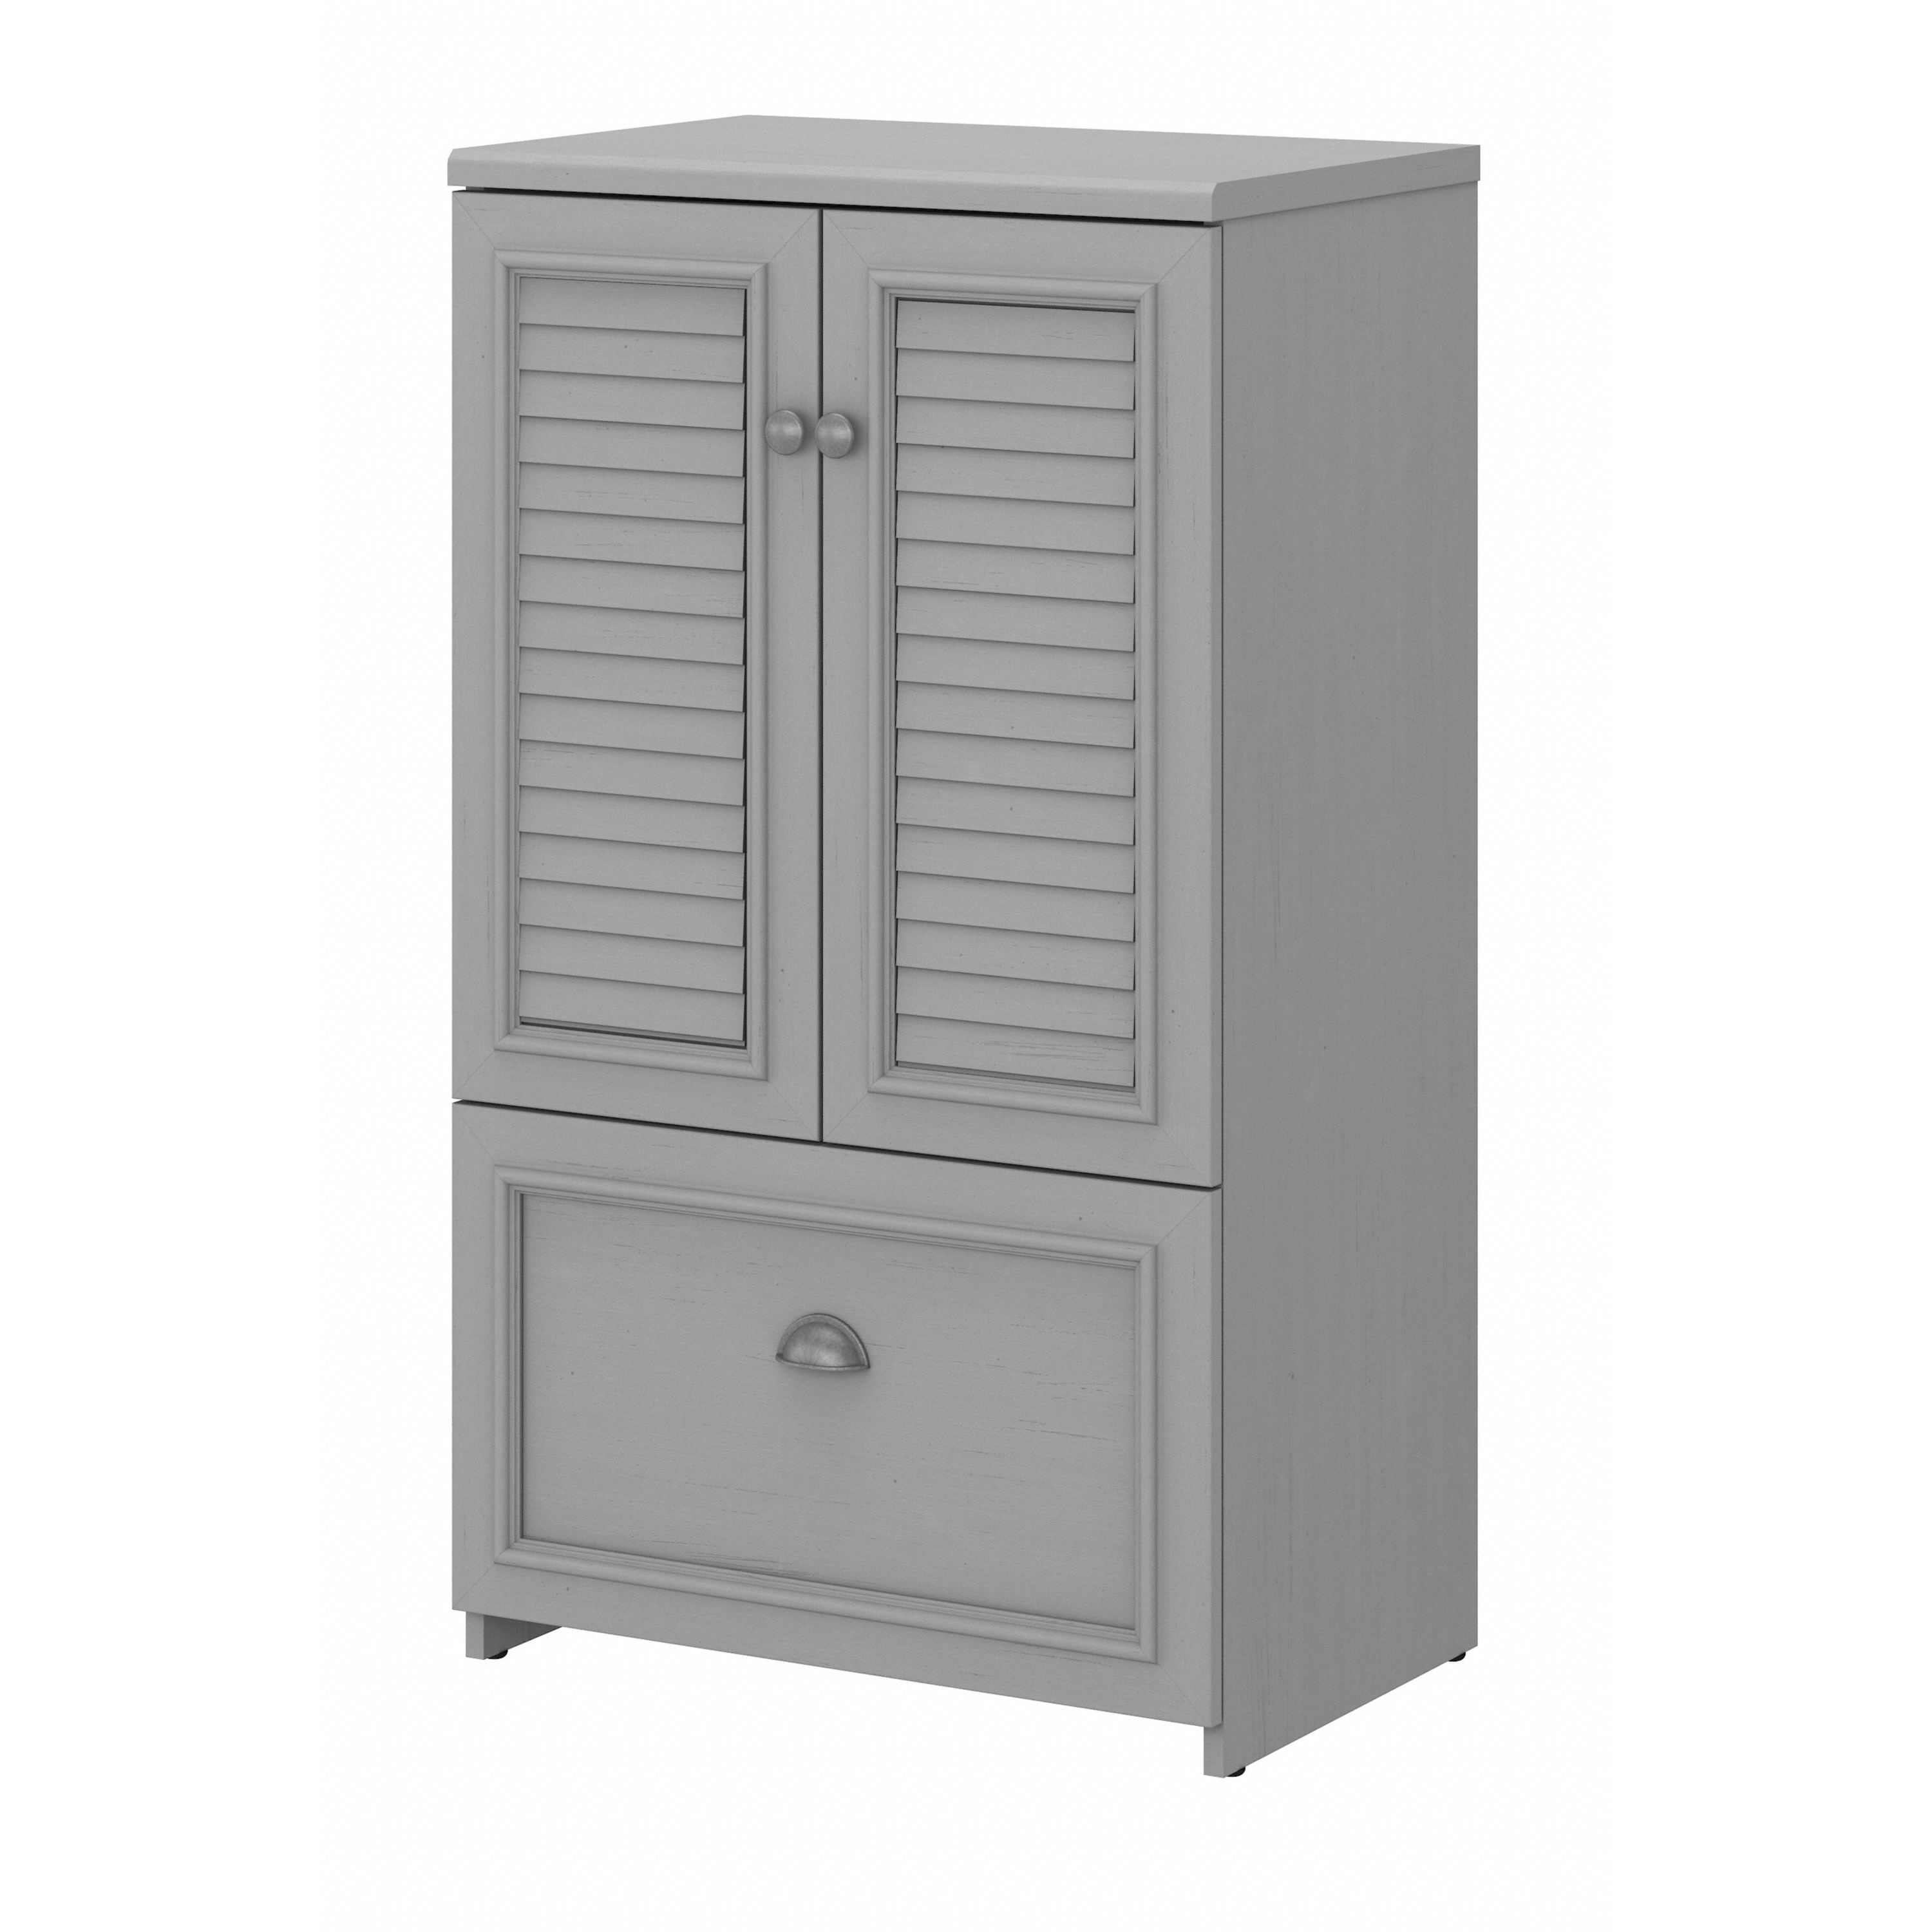 Shop Bush Furniture Fairview 2 Door Storage Cabinet with File Drawer 02 WC53580-03 #color_cape cod gray